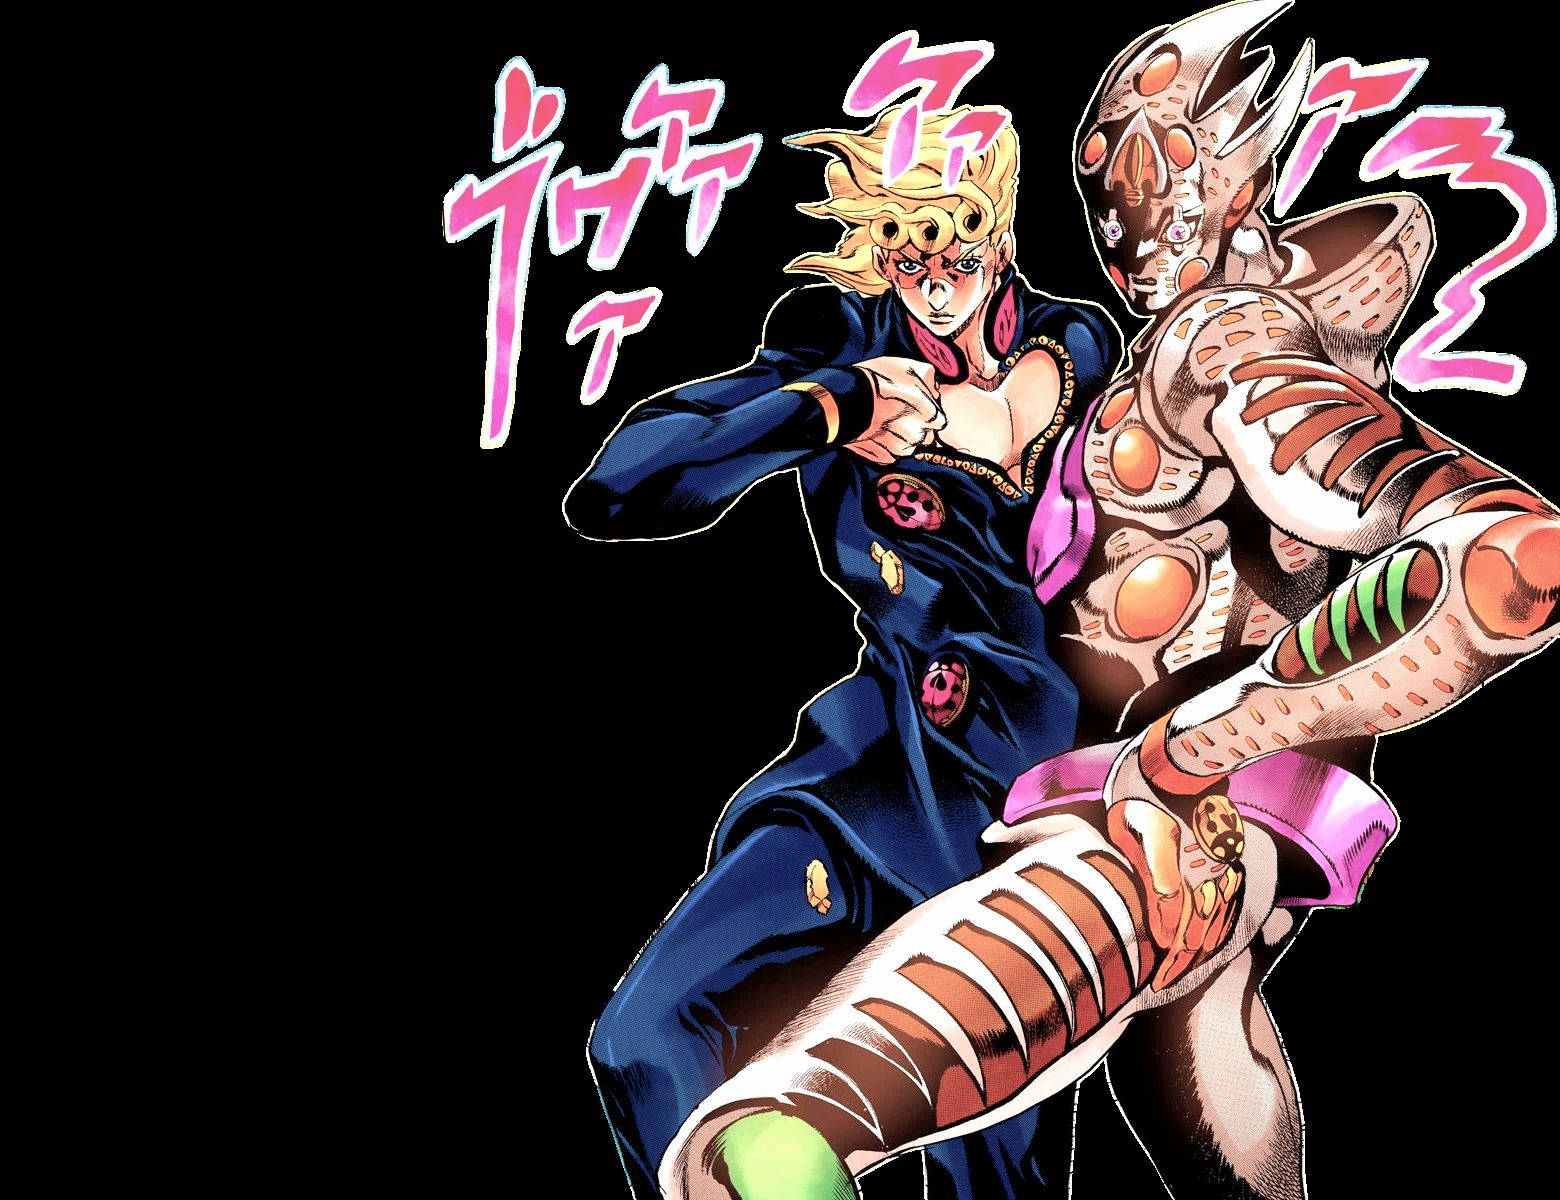 Giorno Giovanna unleashes the power of Gold Experience Requiem Wallpaper